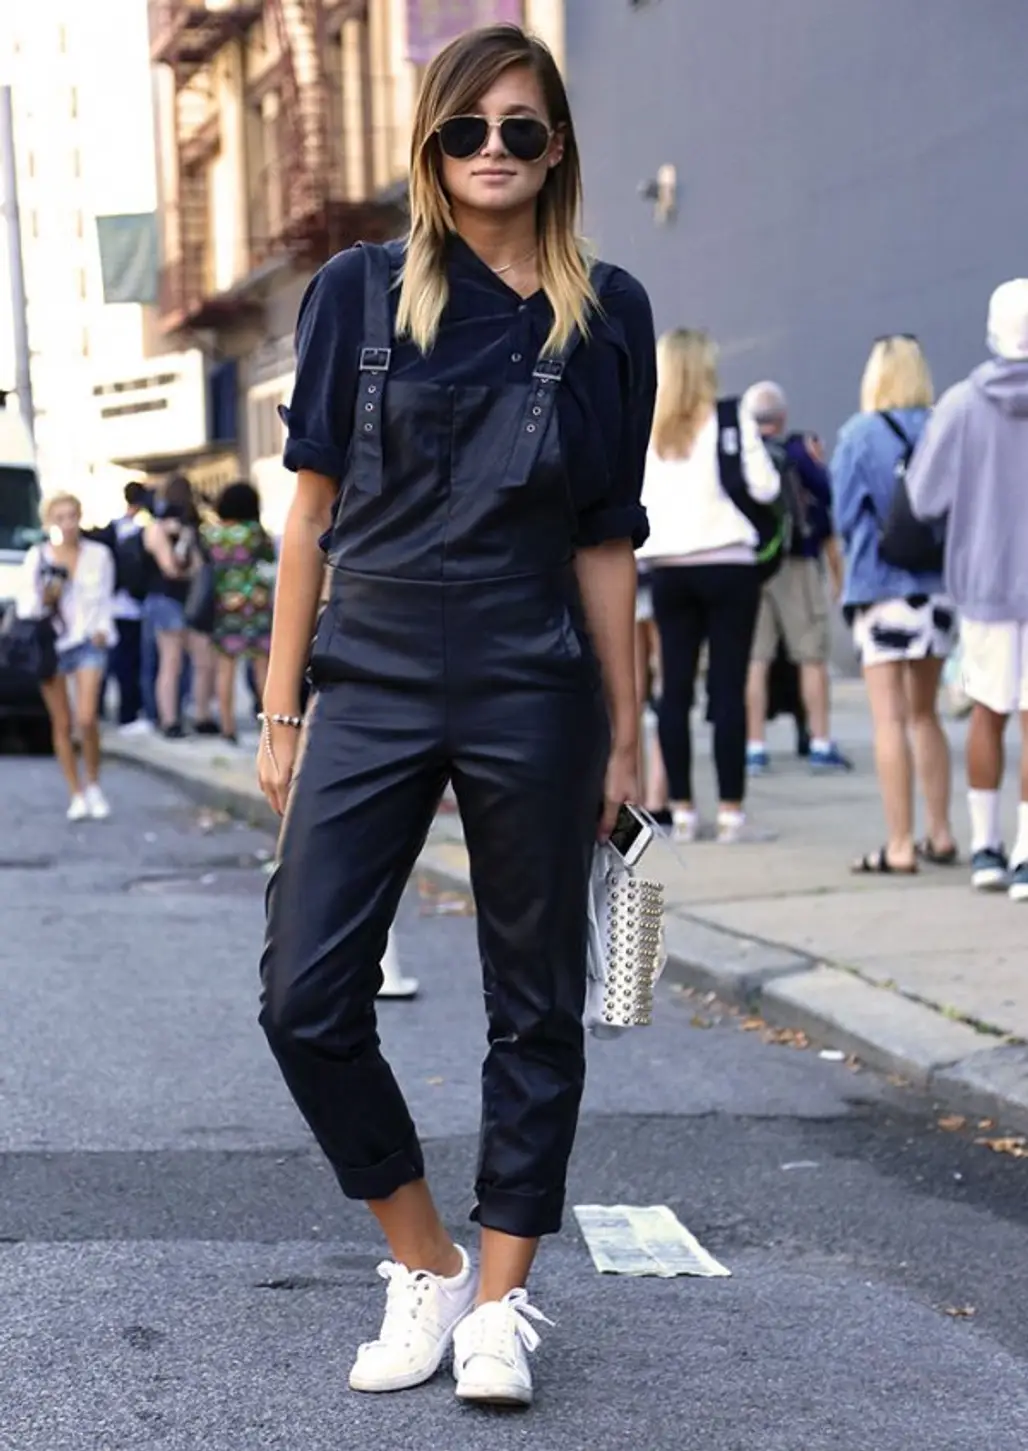 Edgy: Black Dungarees